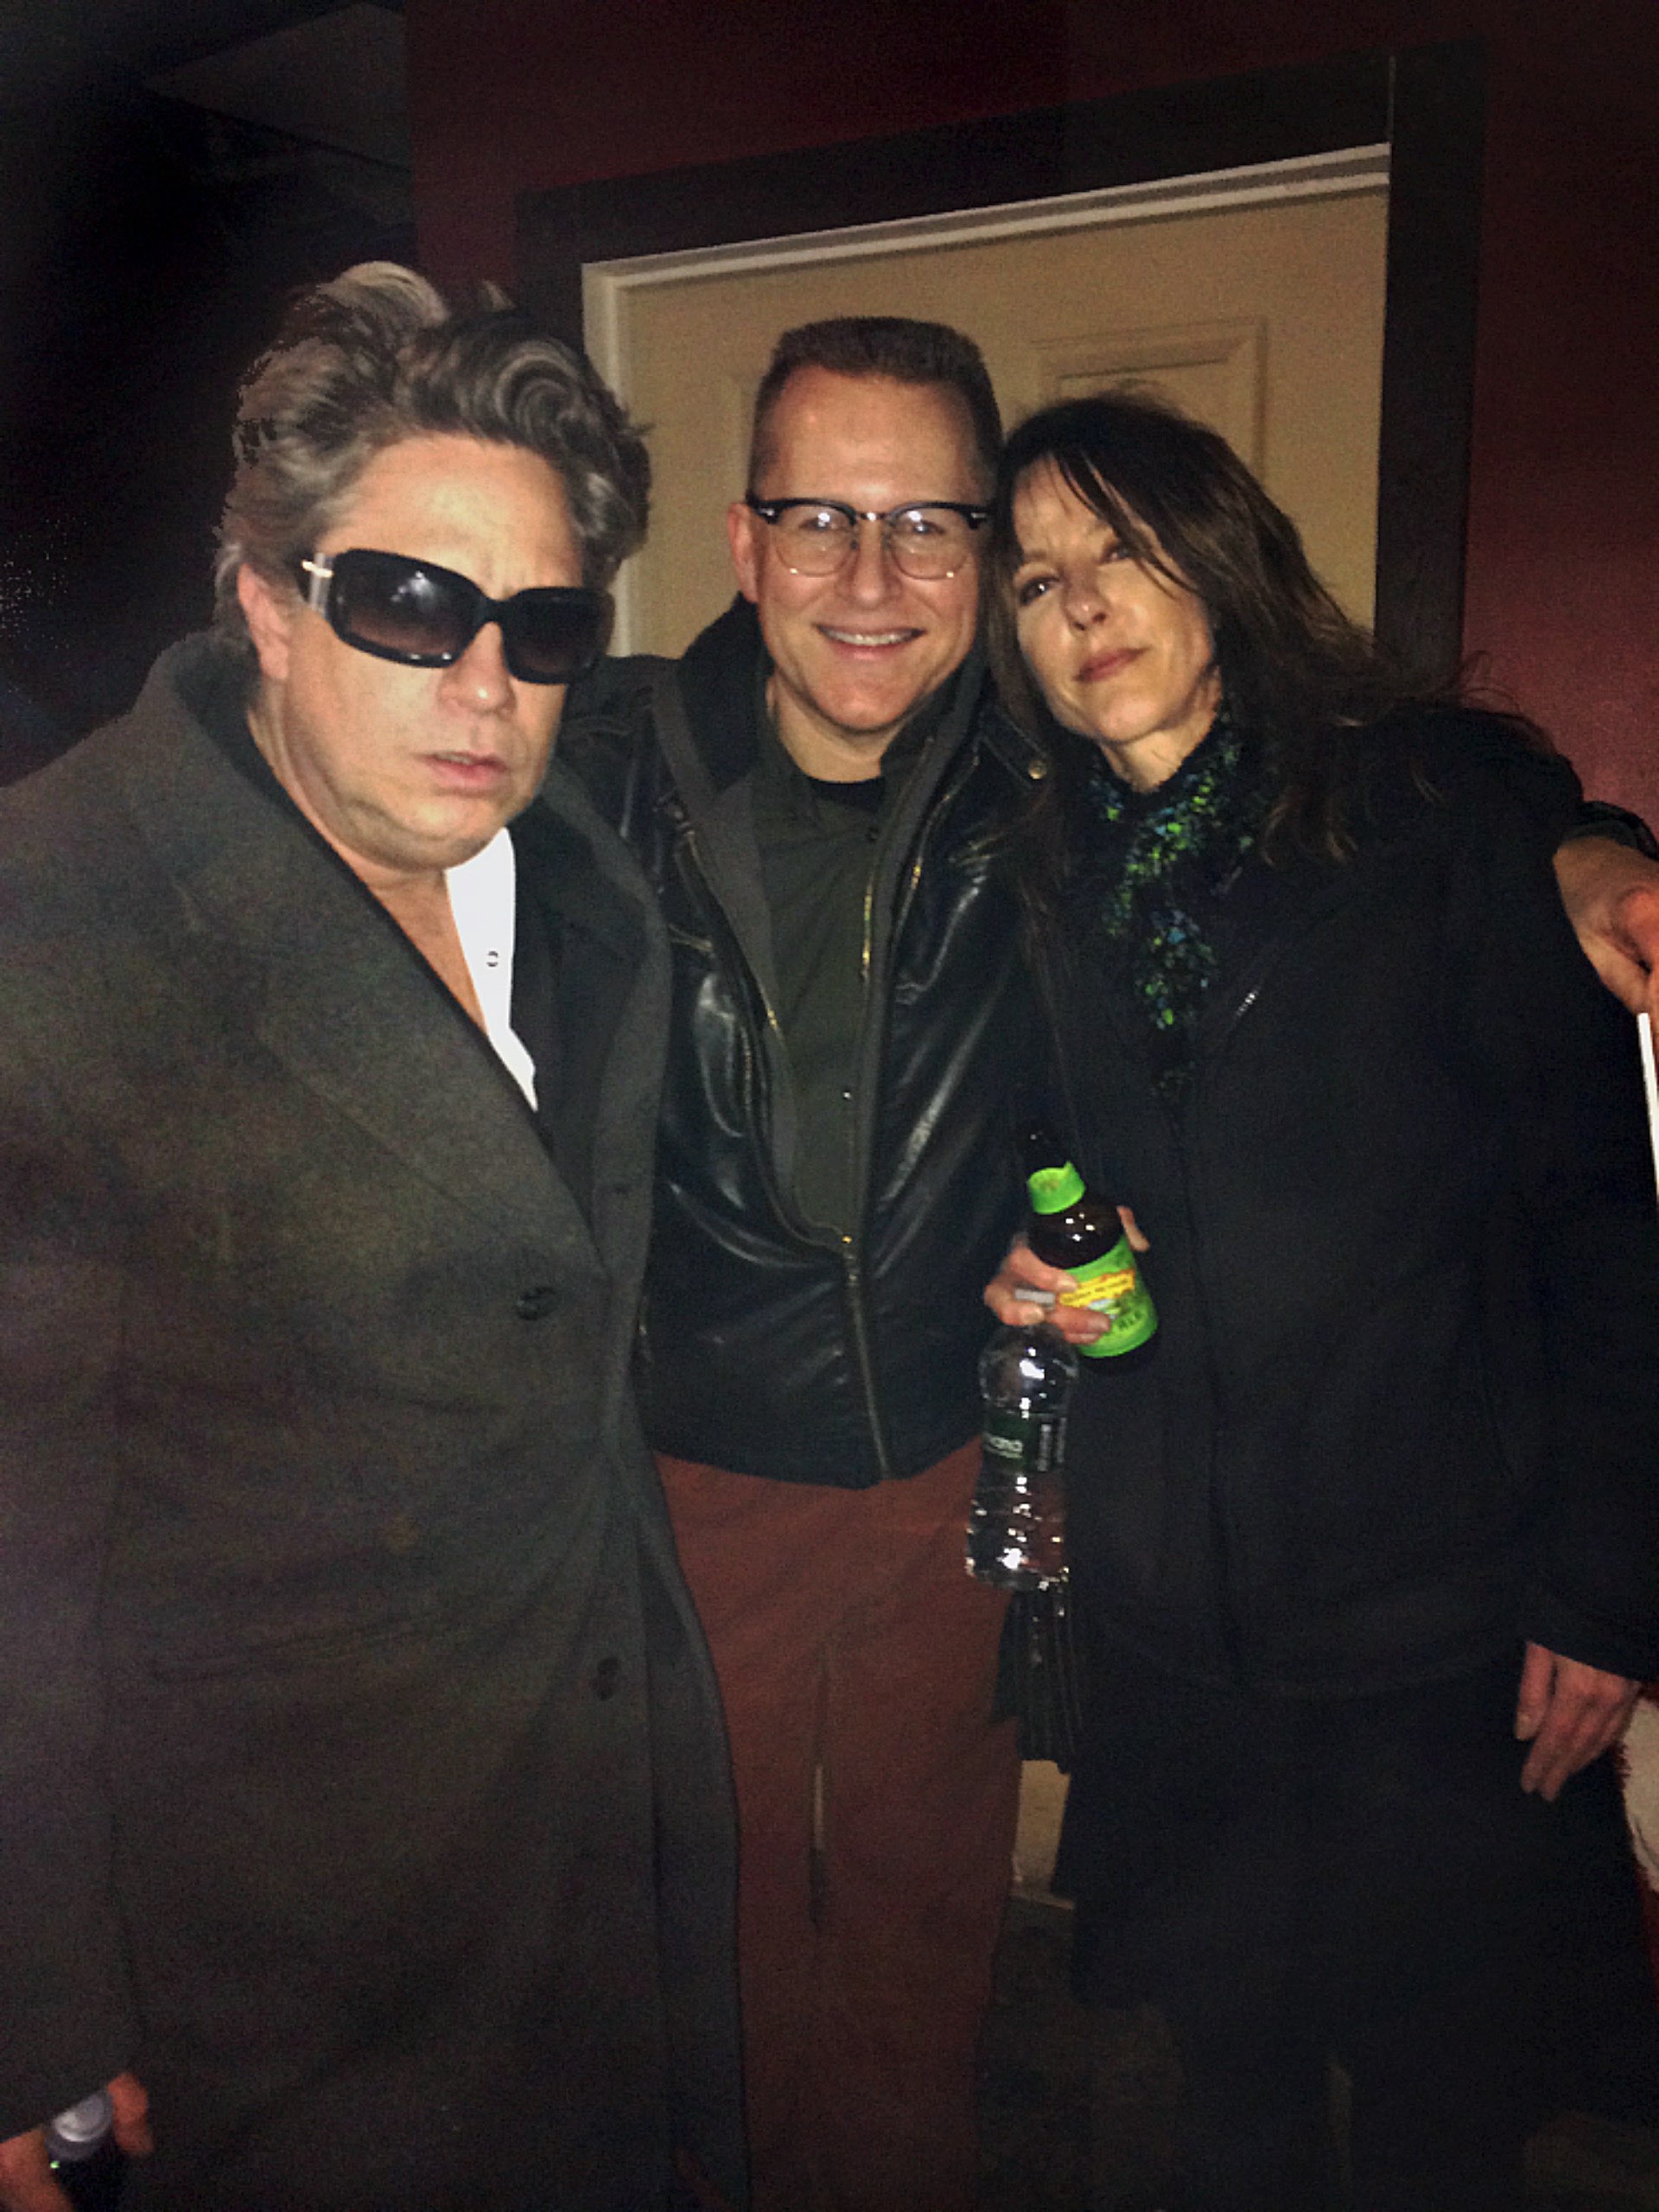 Dexter Romweber (left) a white man with greying, medium length, dark hair in dark overcoat and sunglasses, Rocket Morton (center) a white man smiling in a leather jacket with a crew cut, and Sara Romweber (right) a white woman with long hair in an overcoat and green sparkling scarf holding a beer and a water bottle.